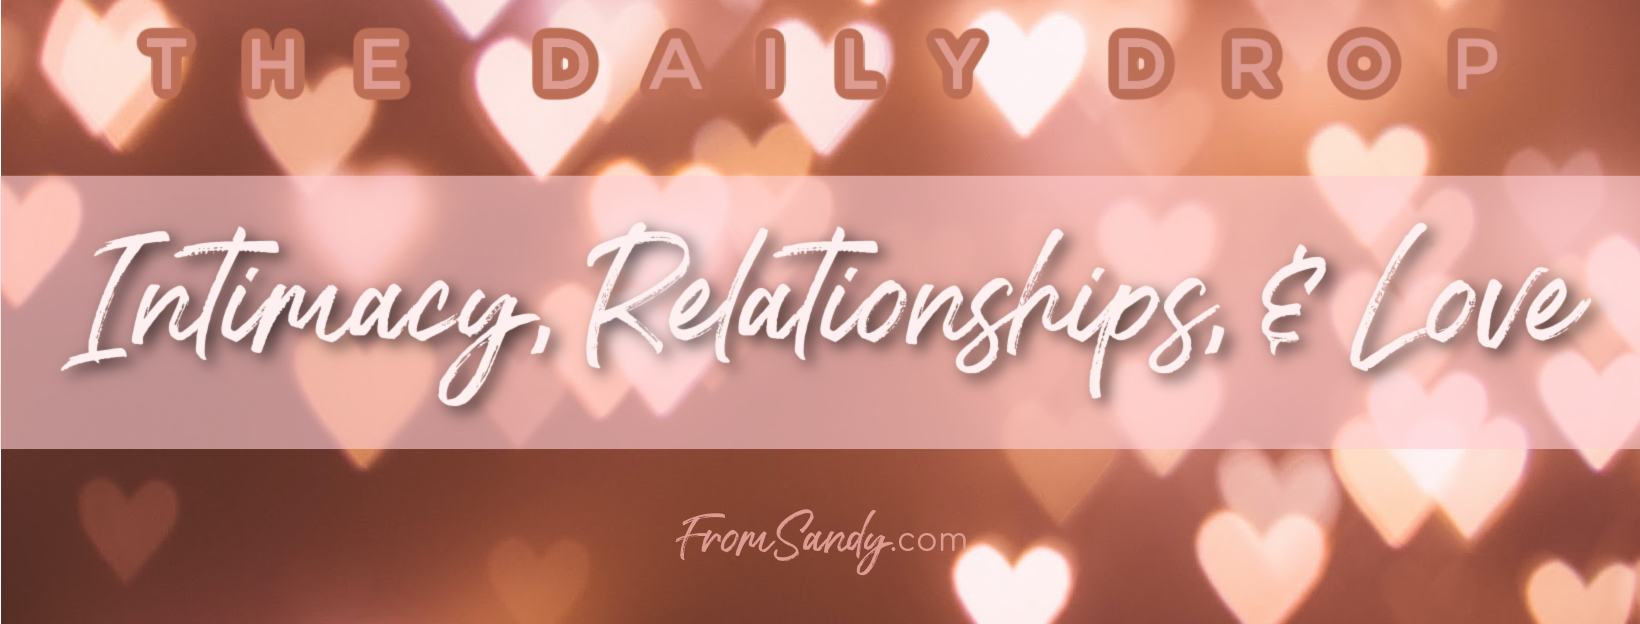 Enhancing Intimacy, Relationships, and Love, From Sandy